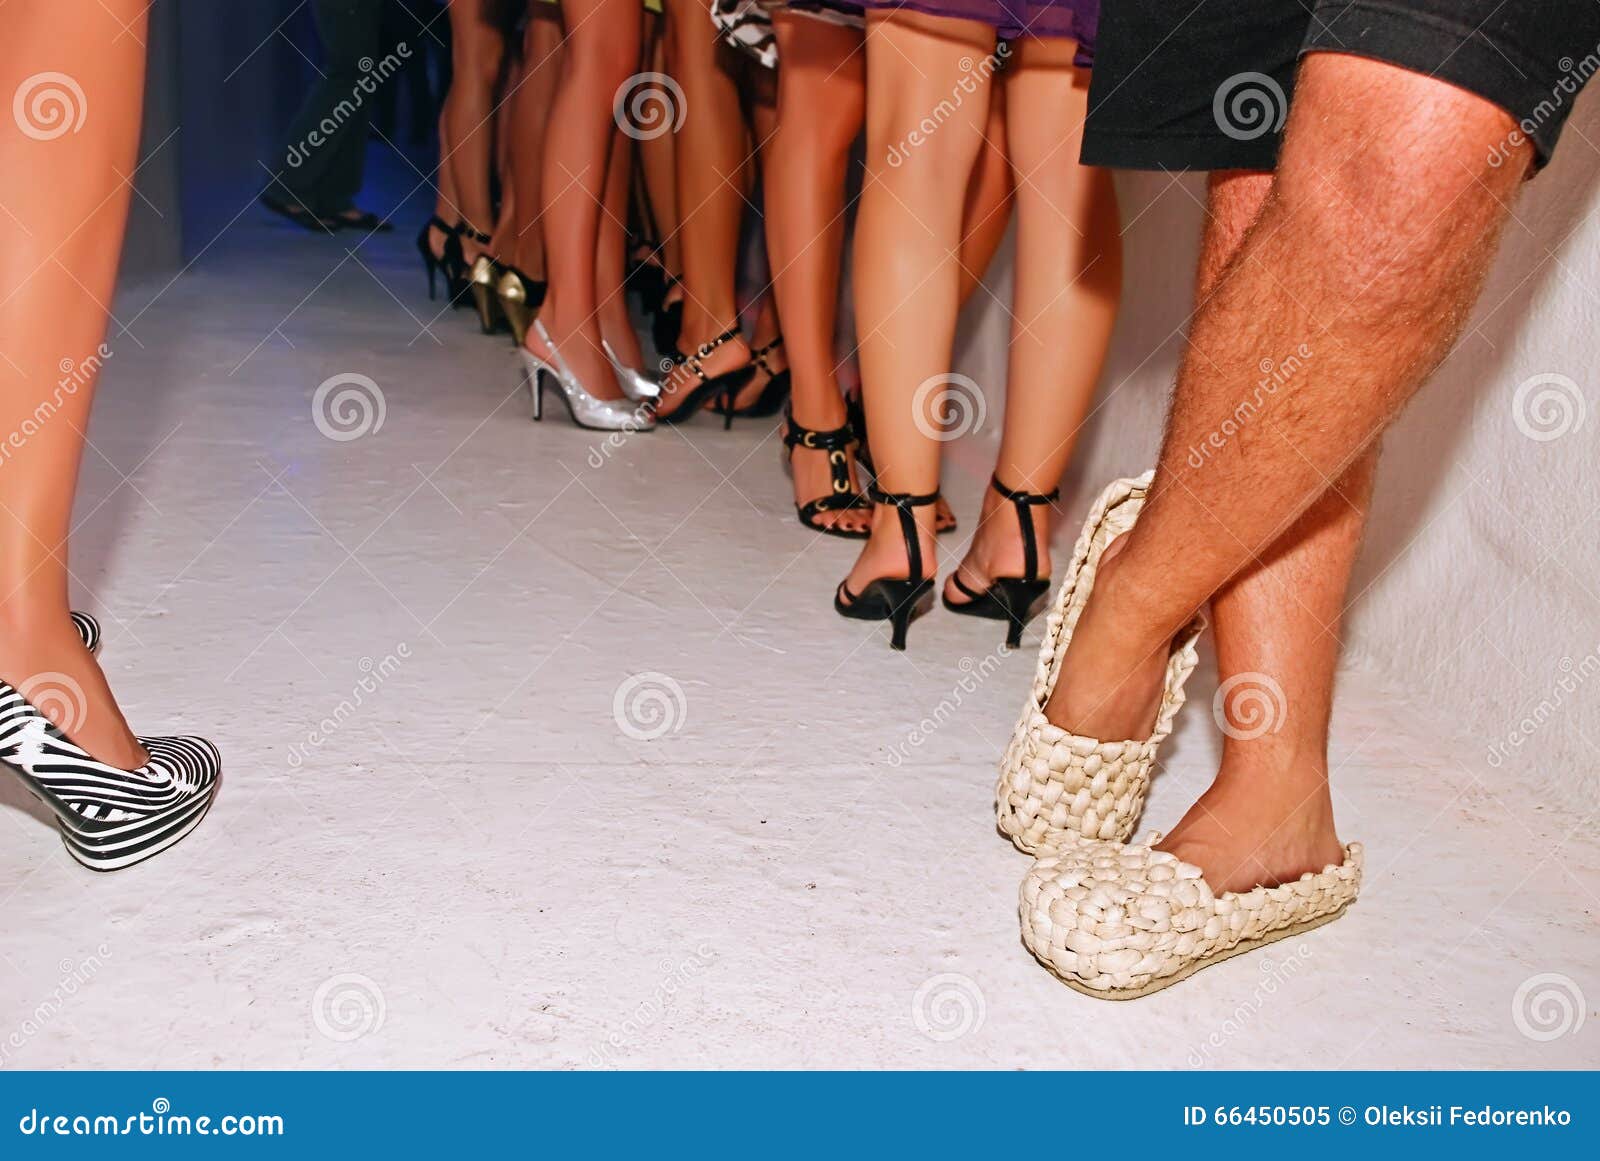 Straw Shoes in the Night Club. Stock Image - Image of shorts, white:  66450505